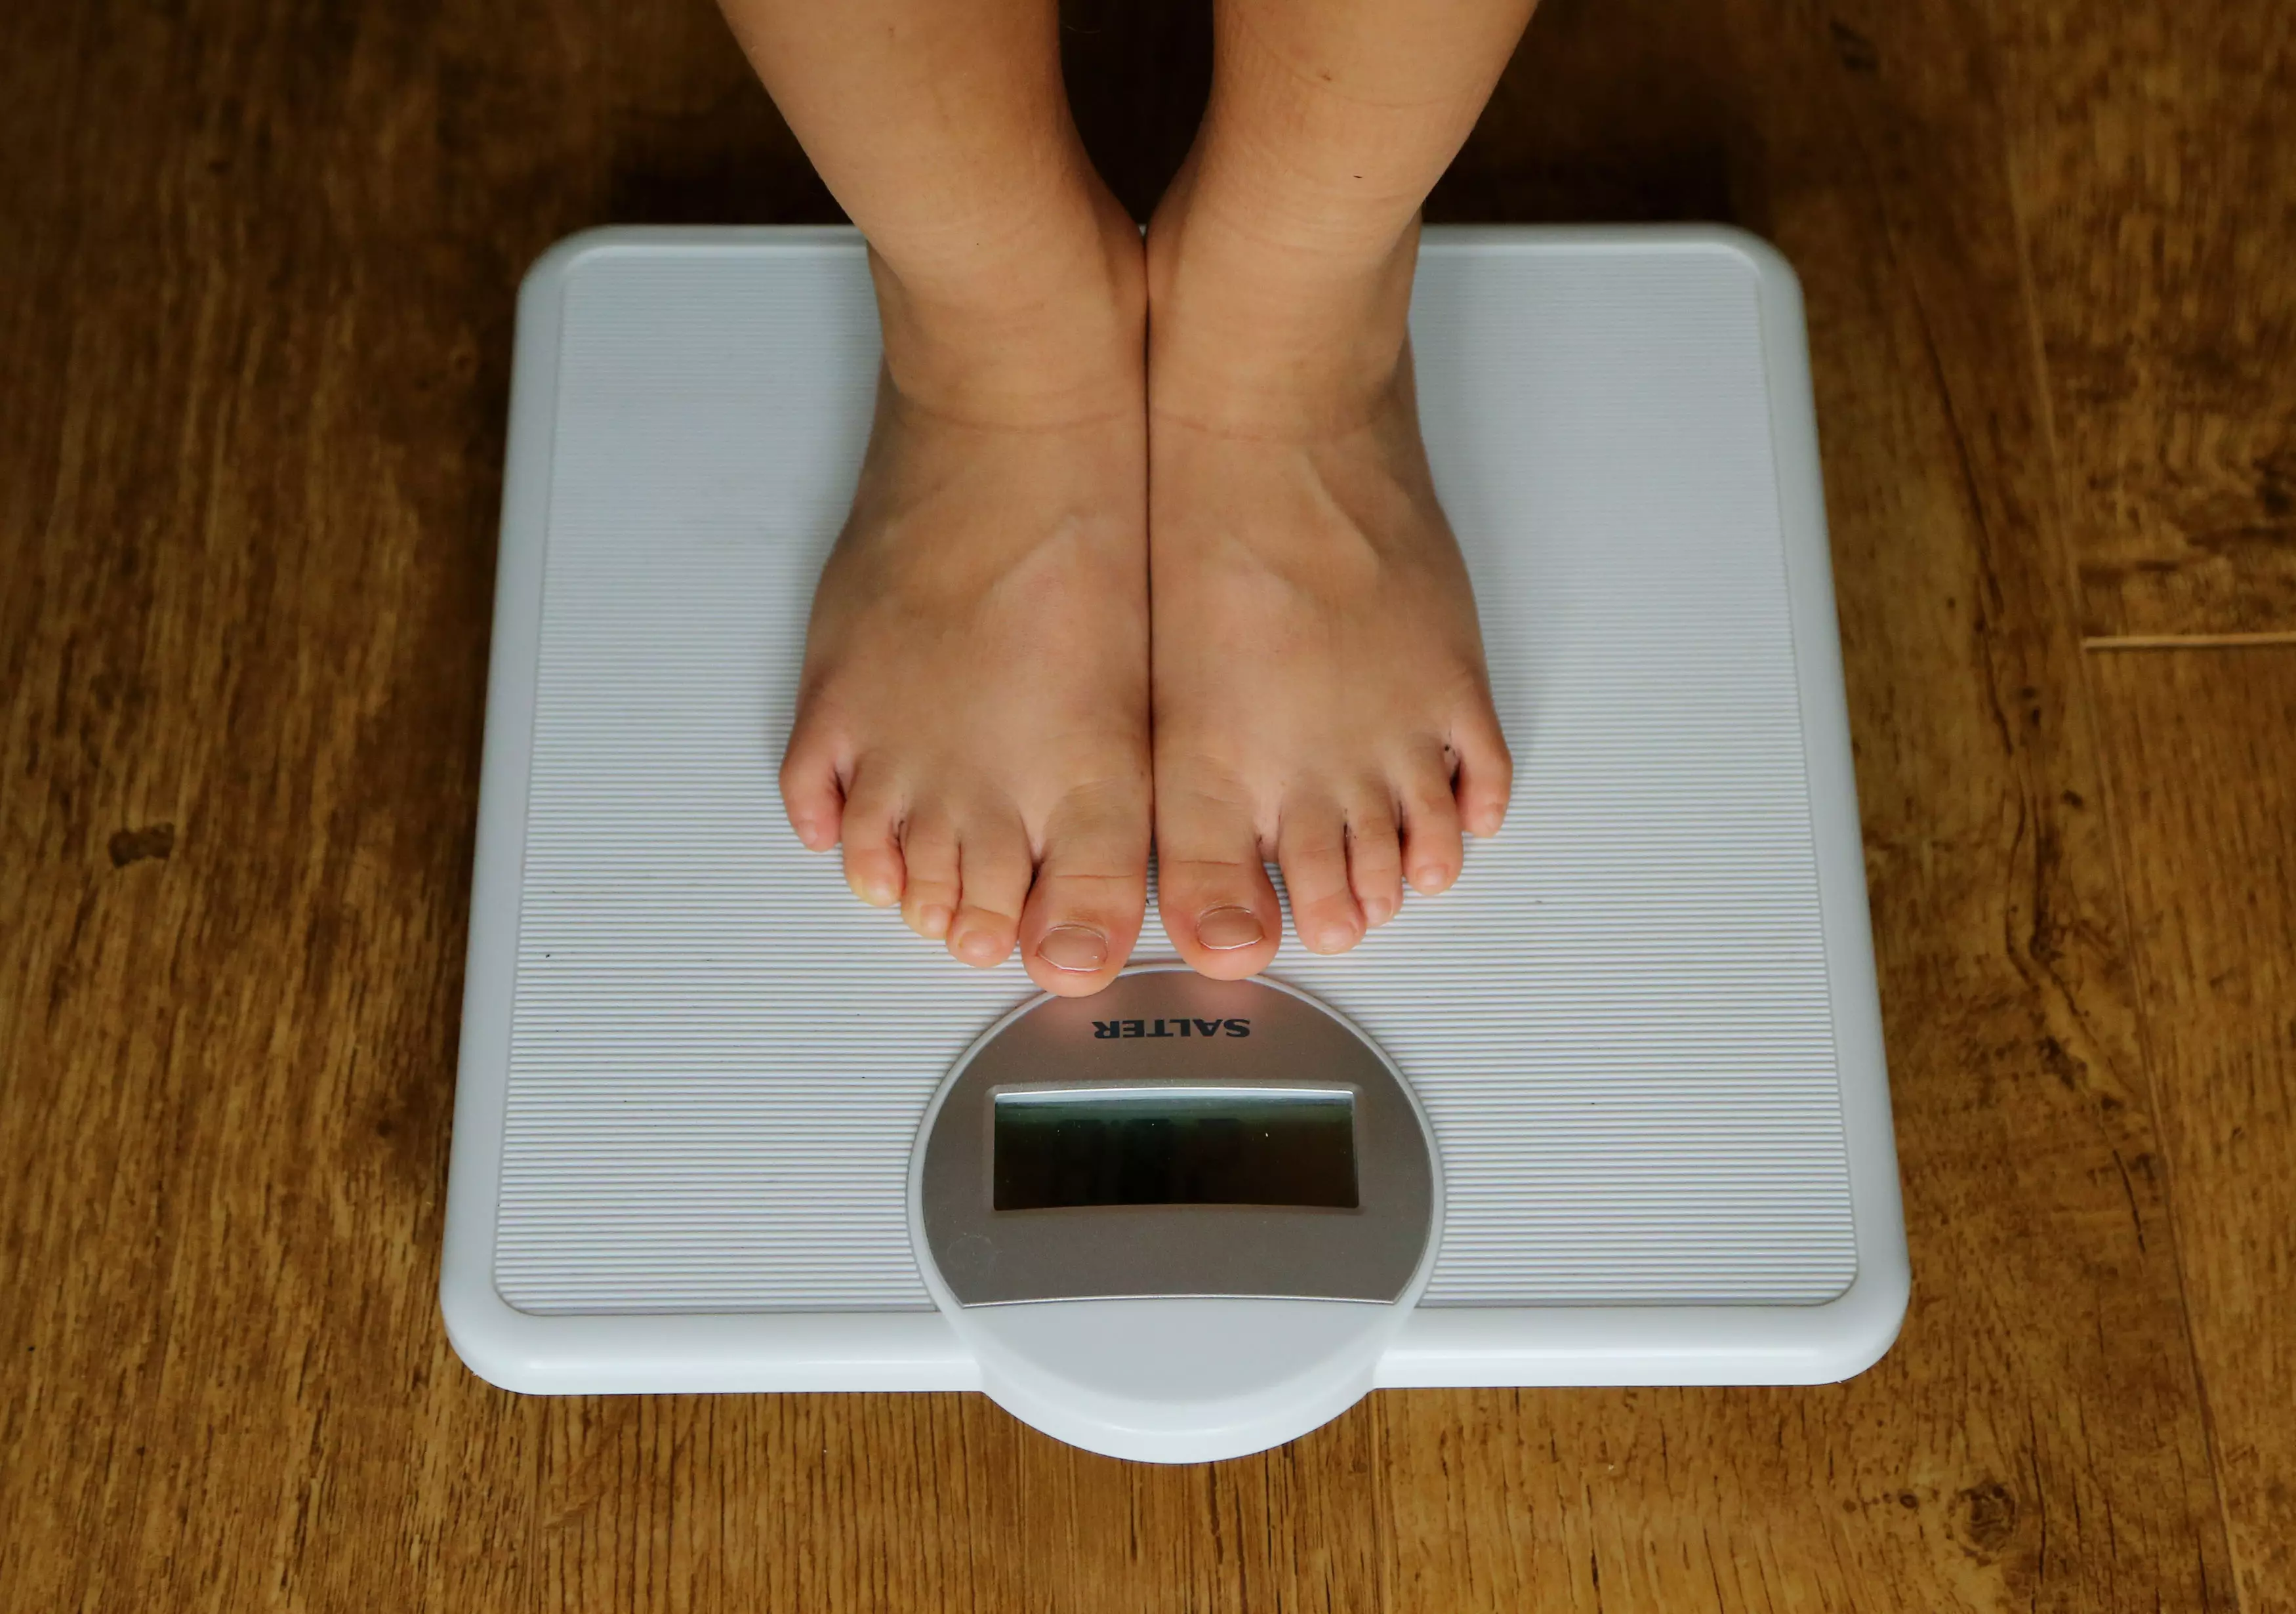 The NHS says that creating a calorie deficit will help with weight loss.